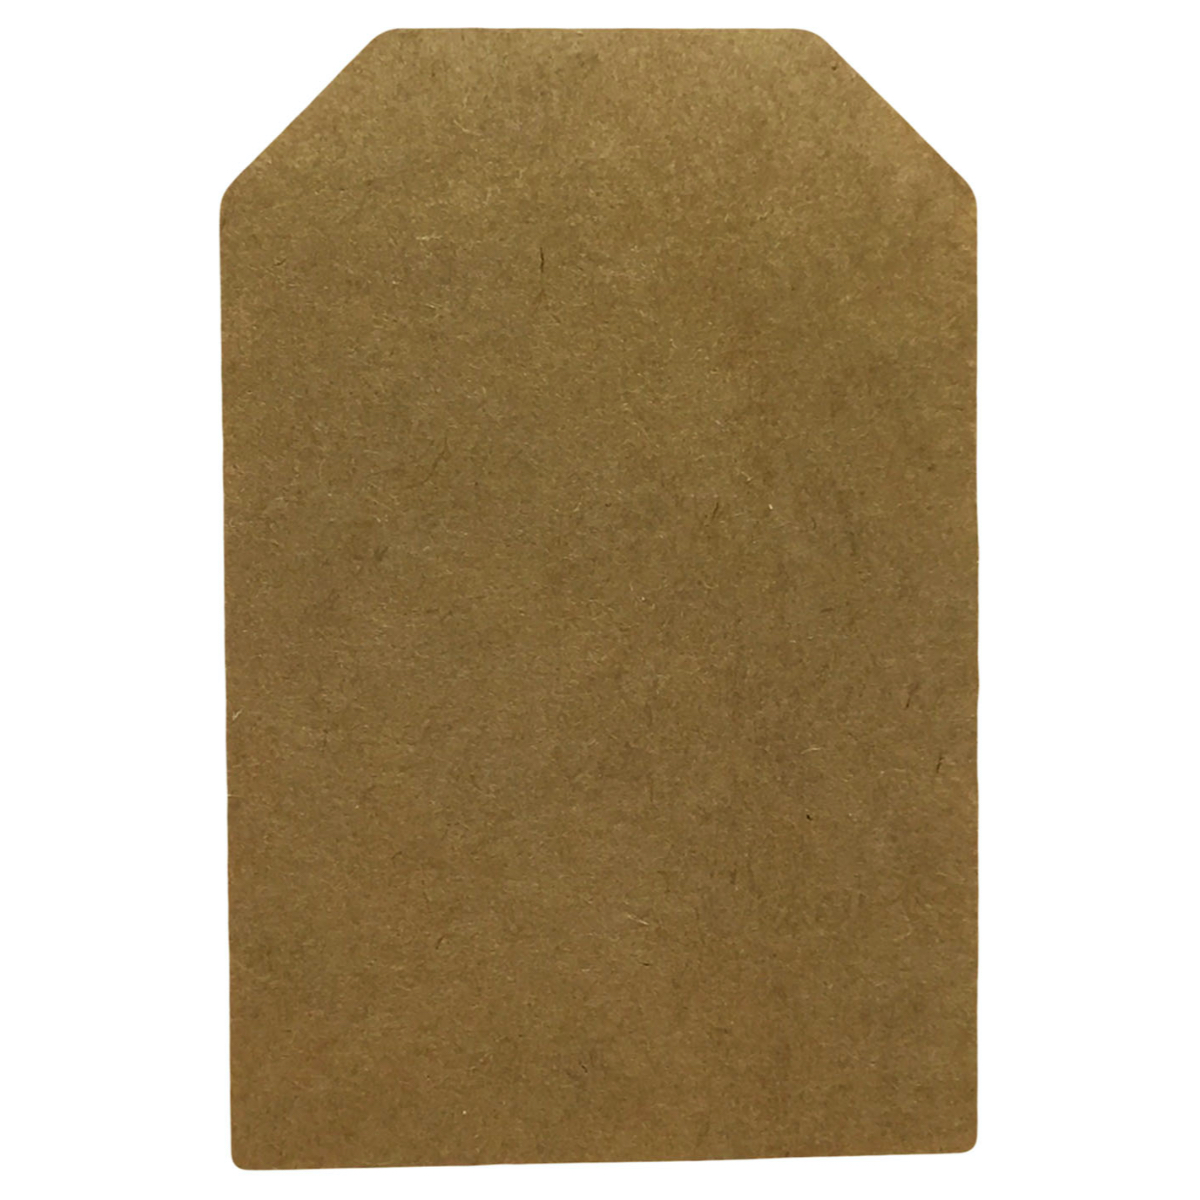 Small Blank Brown Kraft Gift Tags for Gift Wrapping